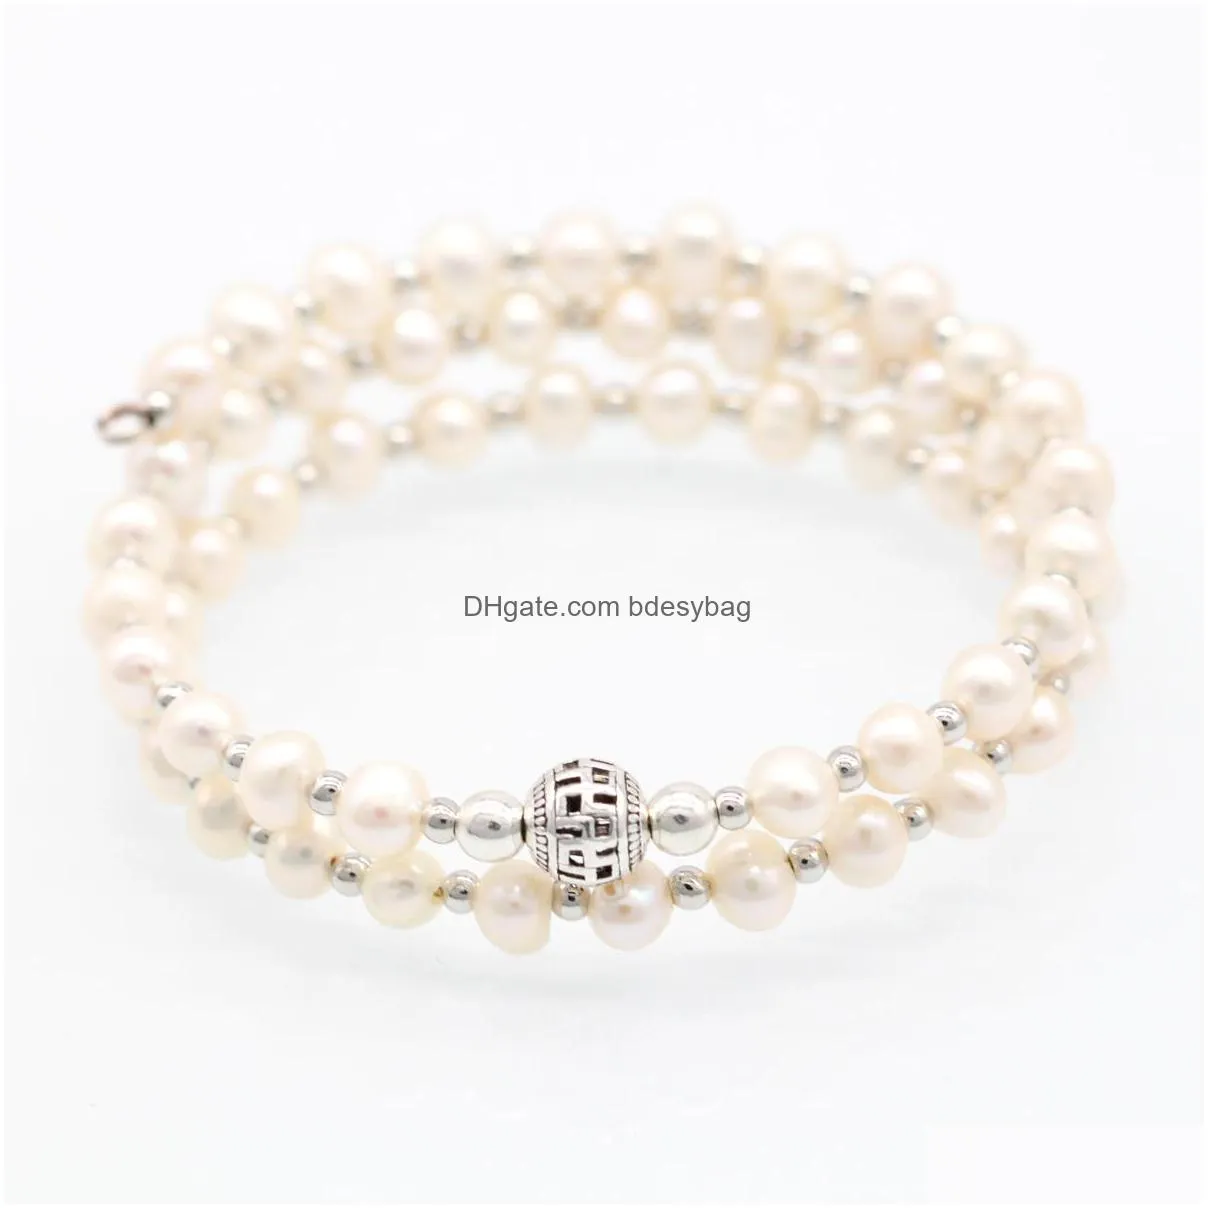 freshwater layer pearl wrap bracelet love wish nearly round dyed color pearl bead bangles adjustable jewelry for women